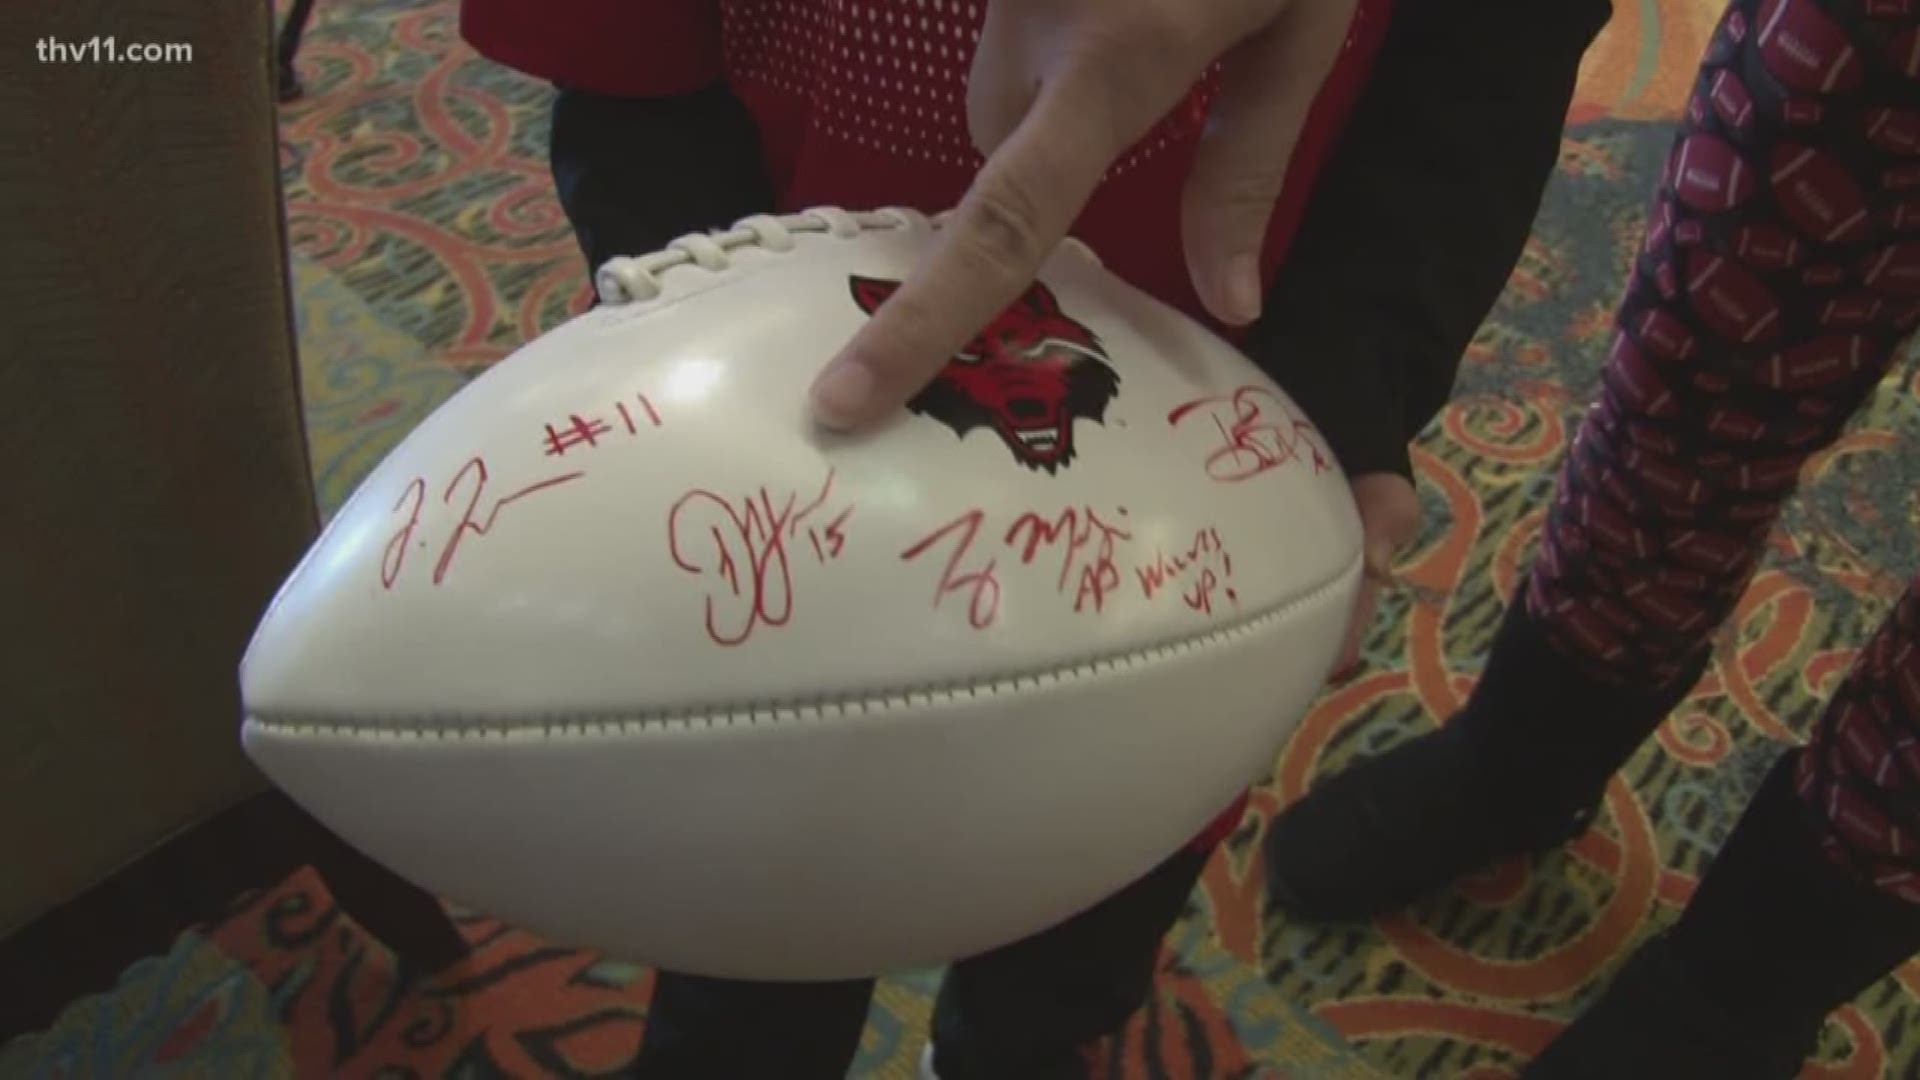 Young fan Peyton got a signature from his favorite Arkansas State player.